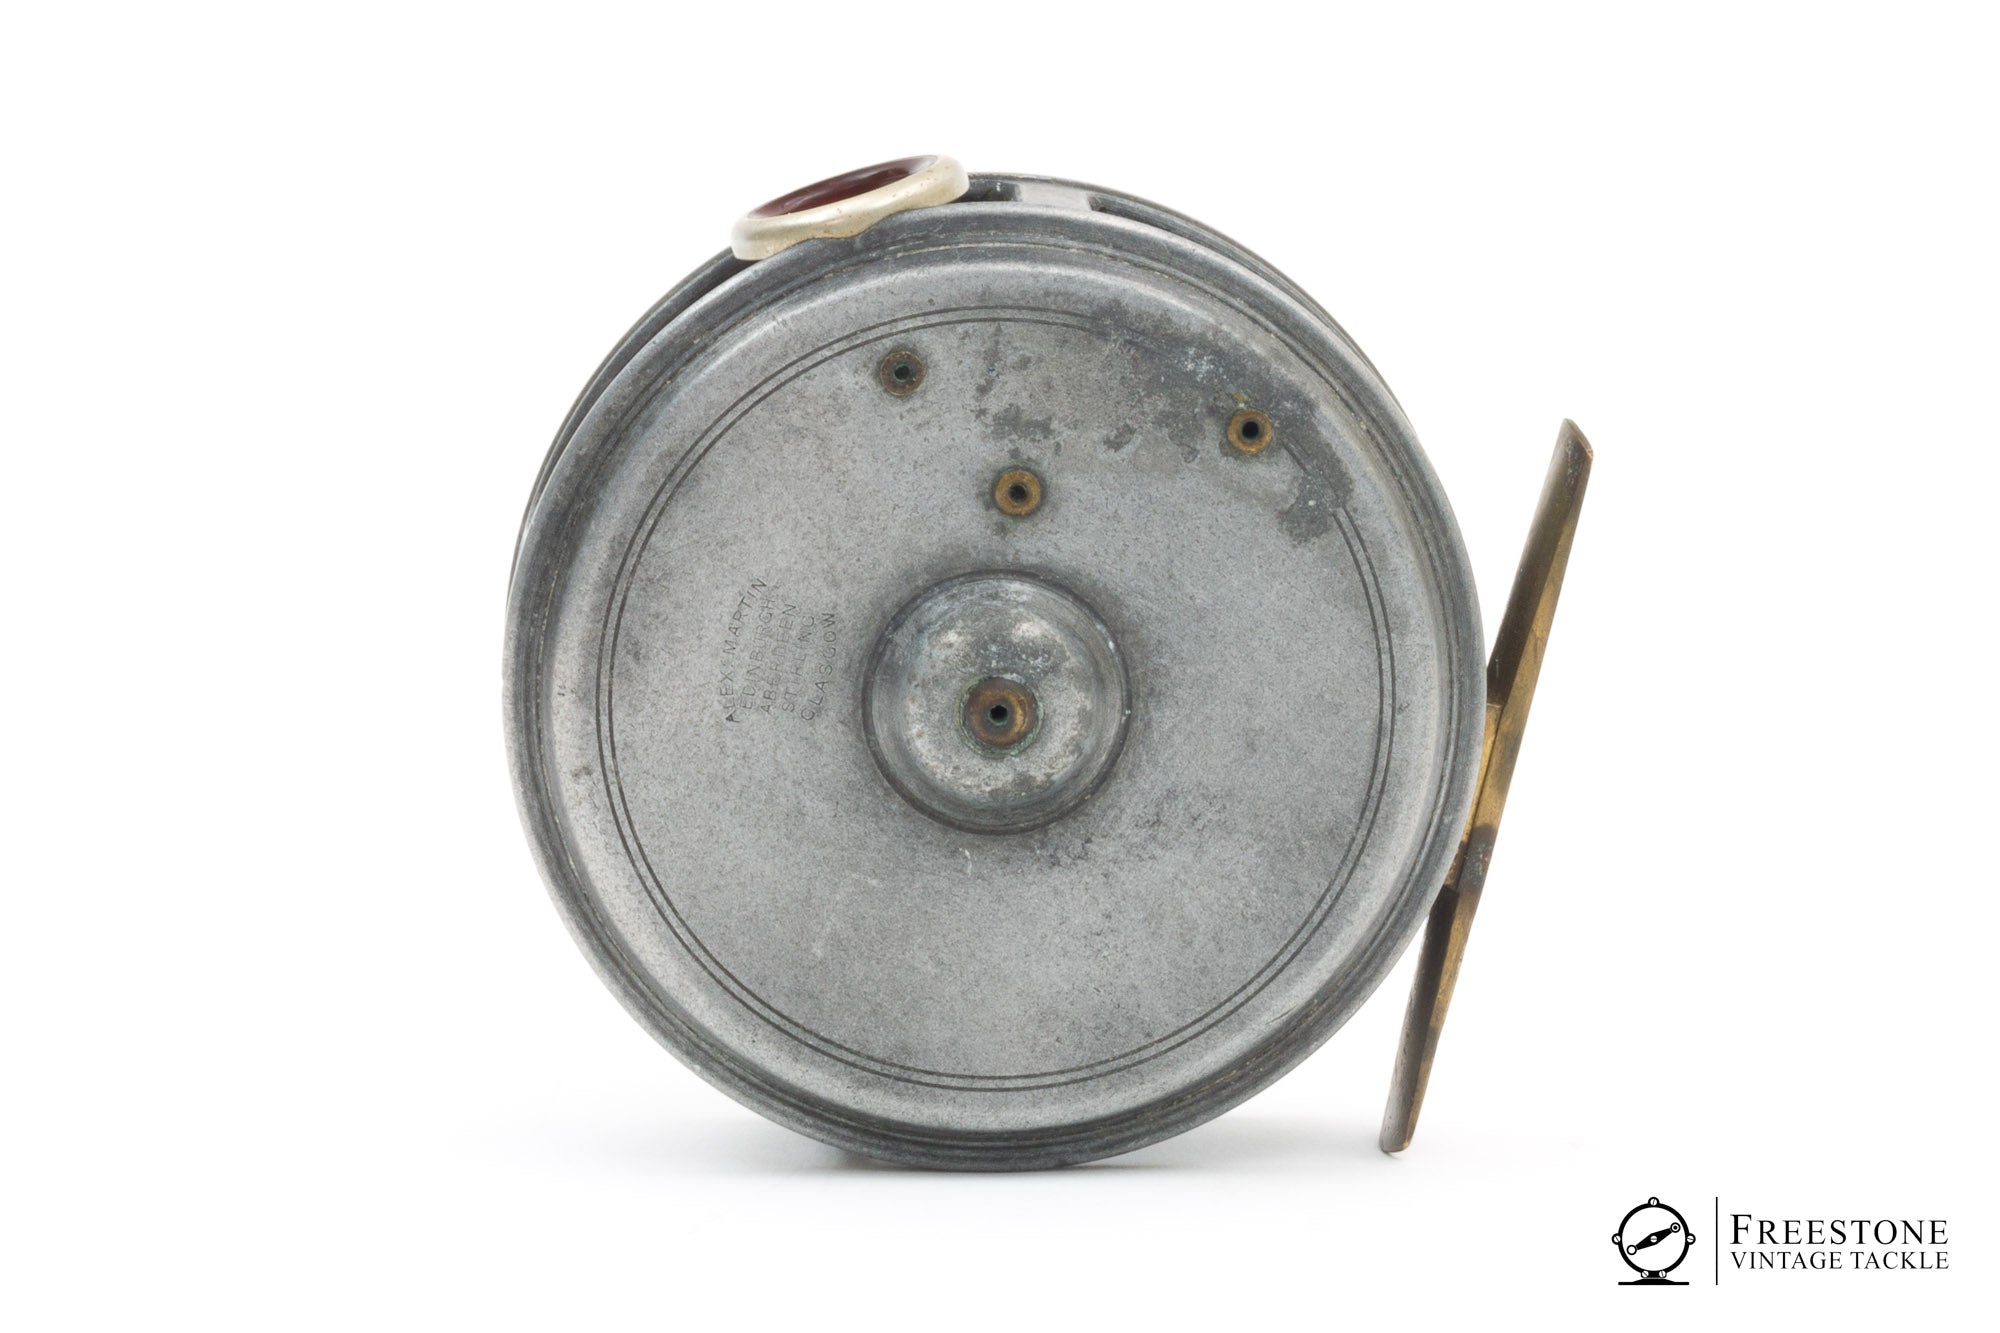 J.W. Young / Alex Martin - Pattern No. 1, 3 1/2 Fly Reel